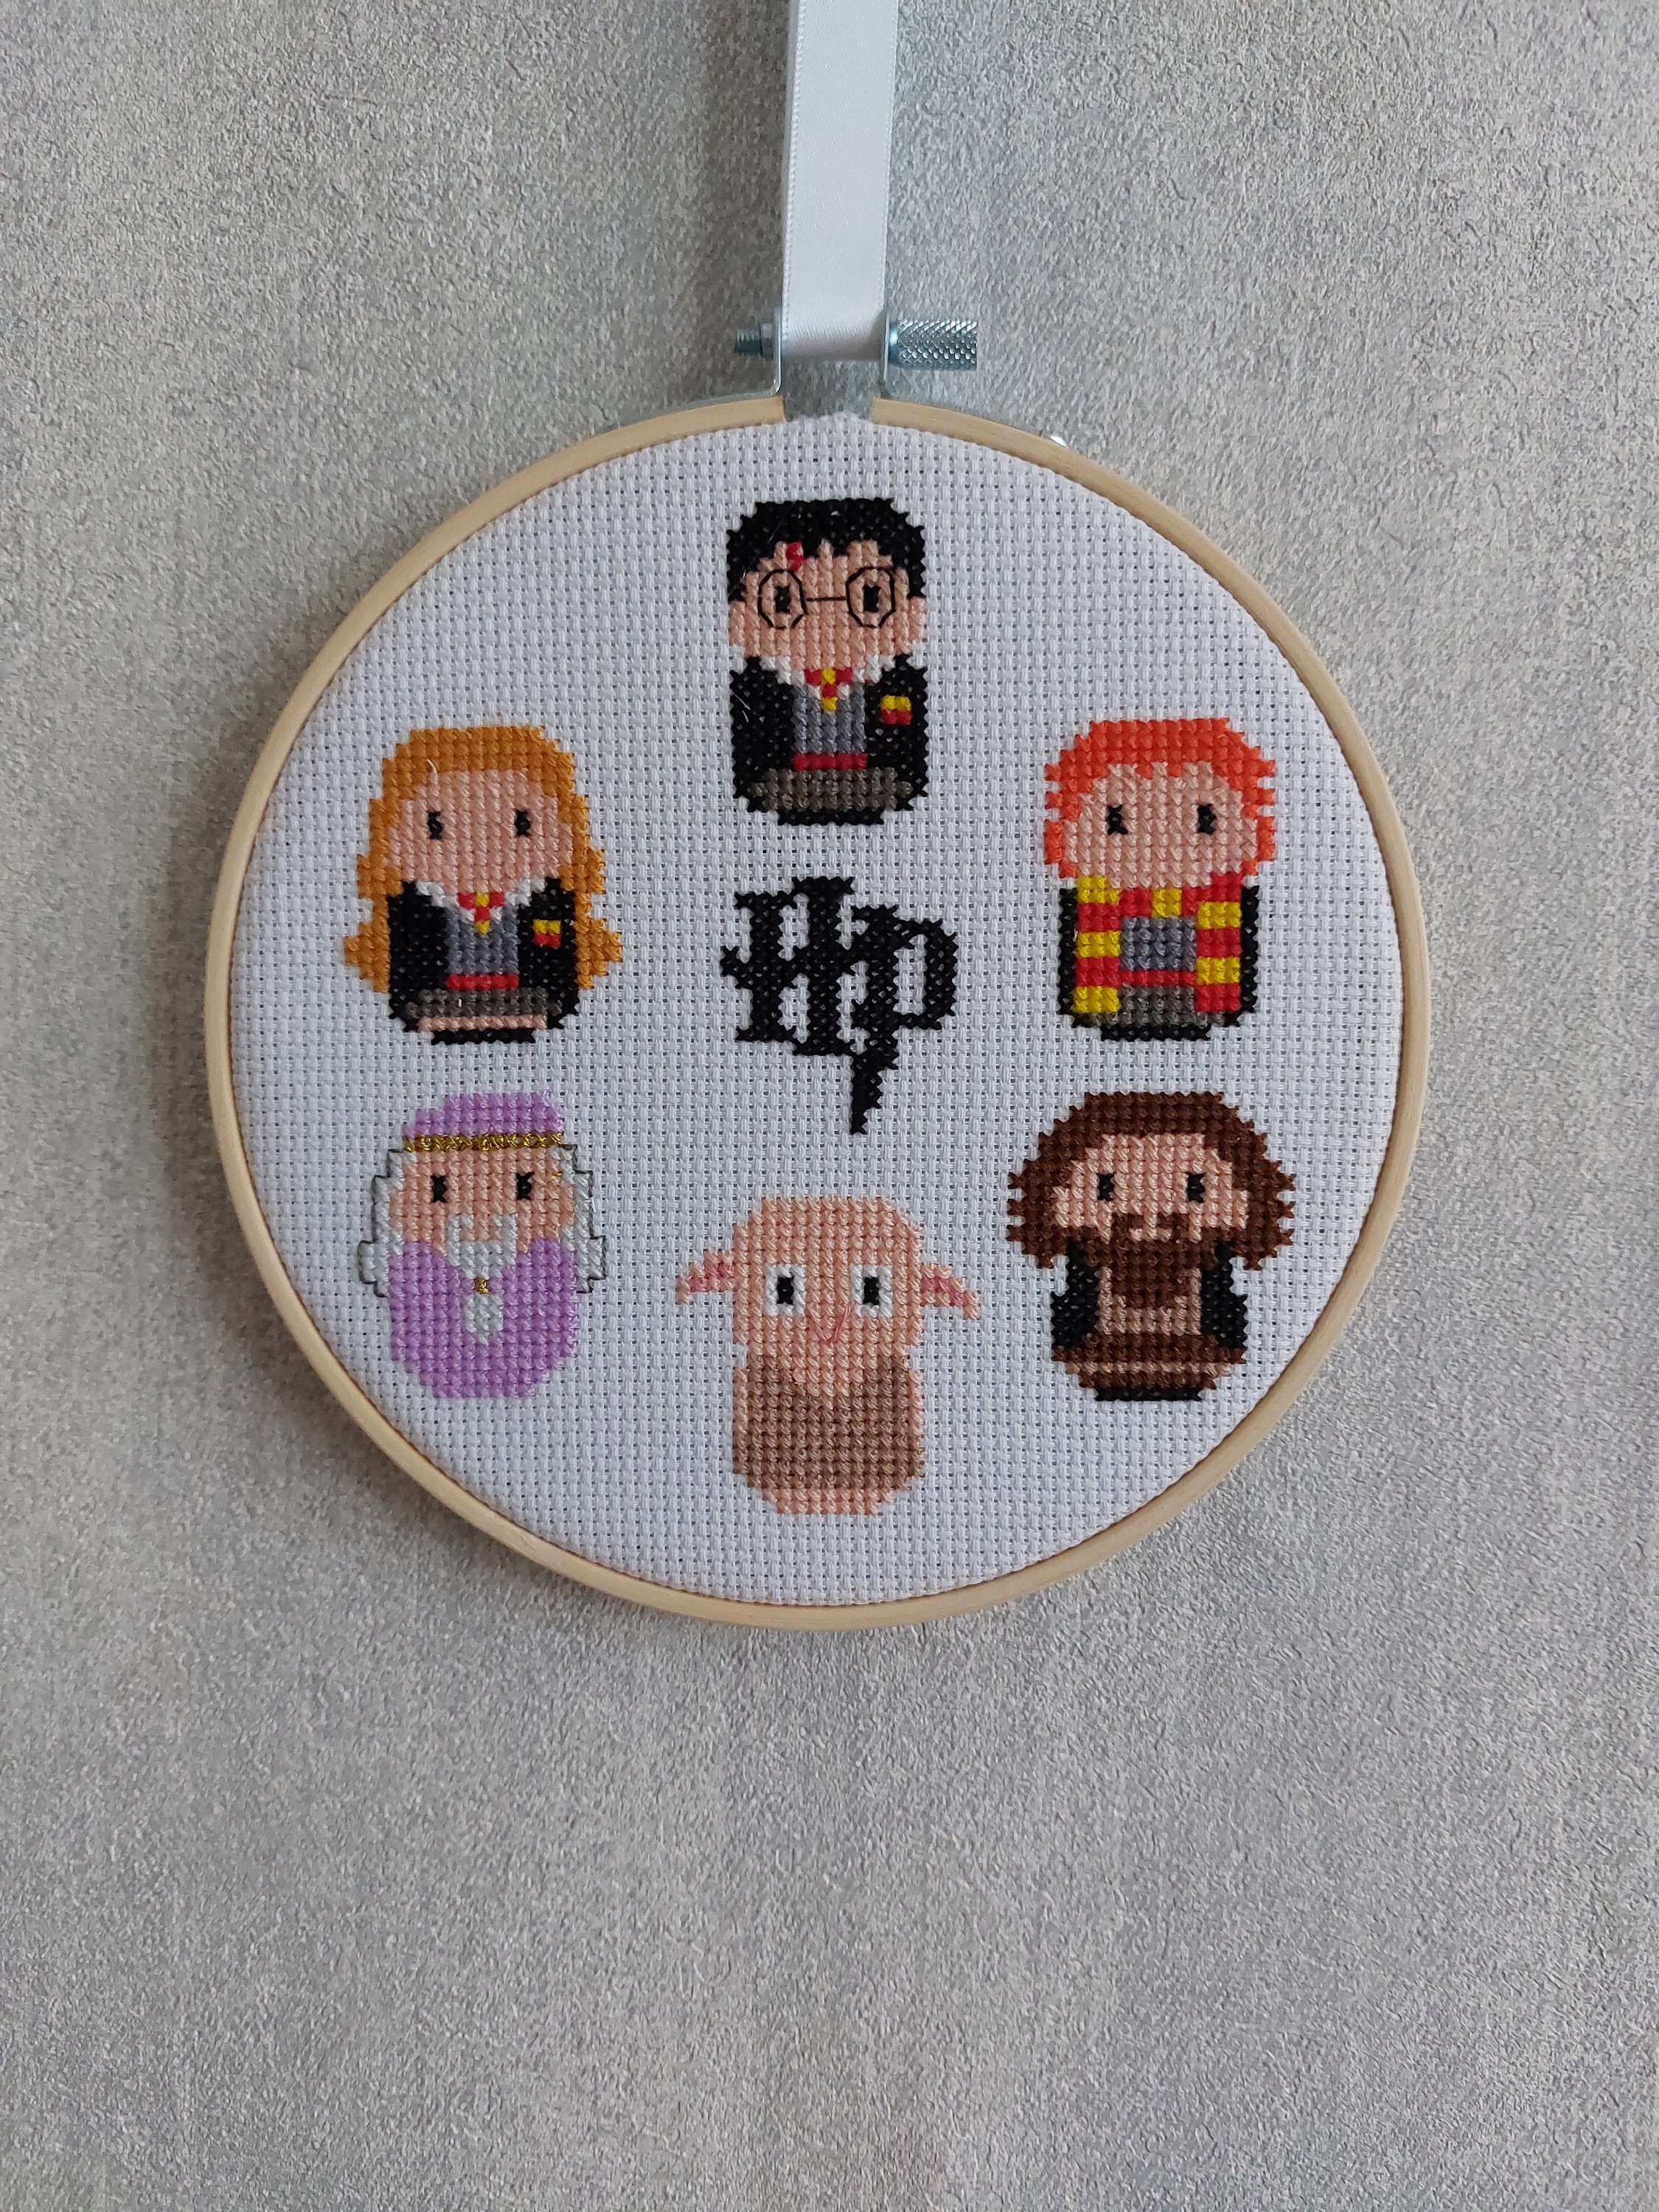 FO] Gigantic Harry Potter Cross Stitch Finished! Now To, 55% OFF